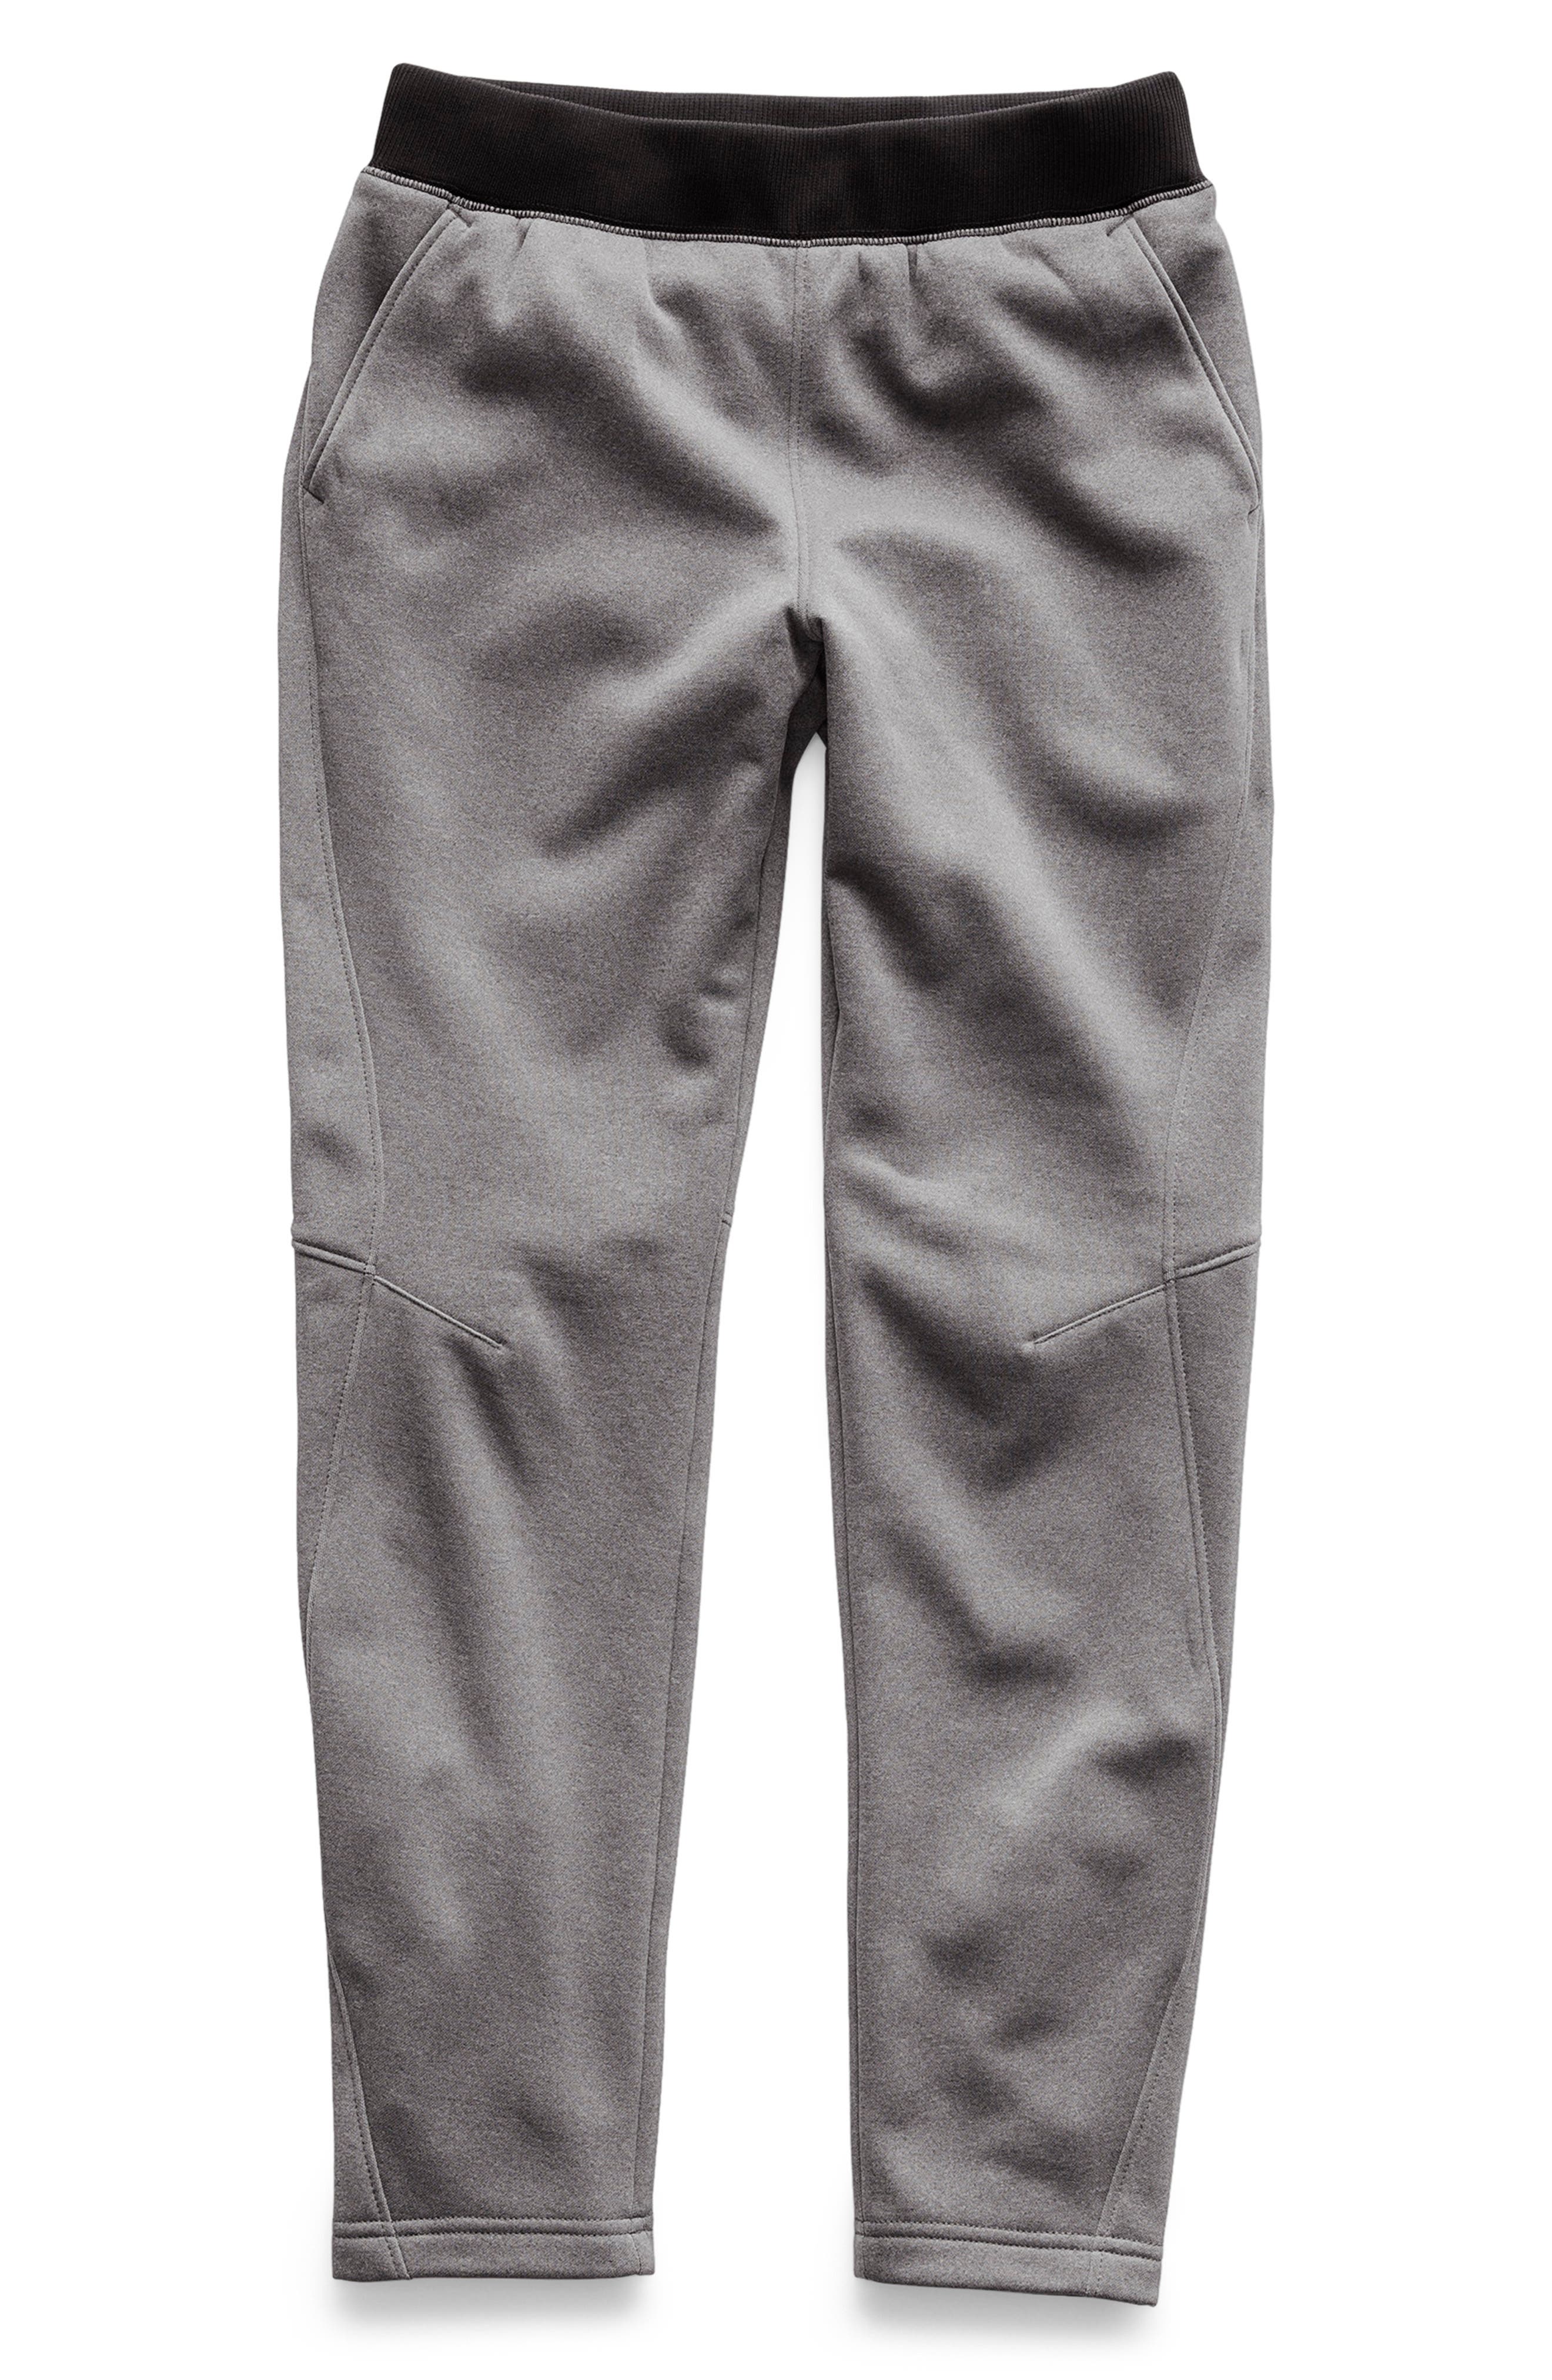 boys north face track pants